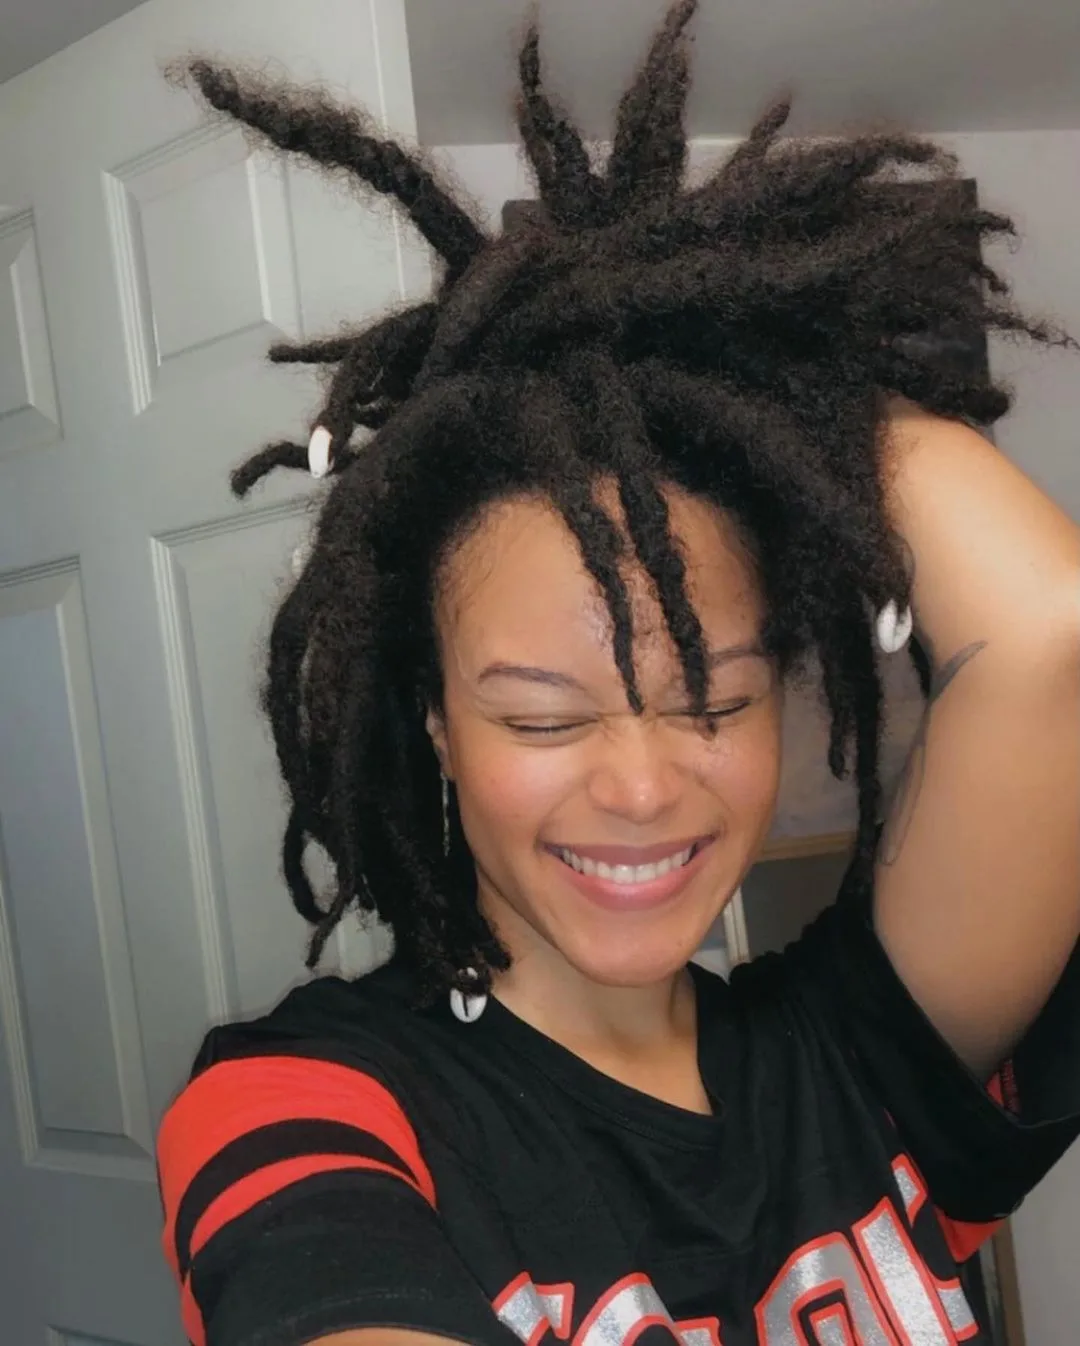 Lady with spikey dreadlocks smiles and does a crazy party face while wearing a bright colored shirt